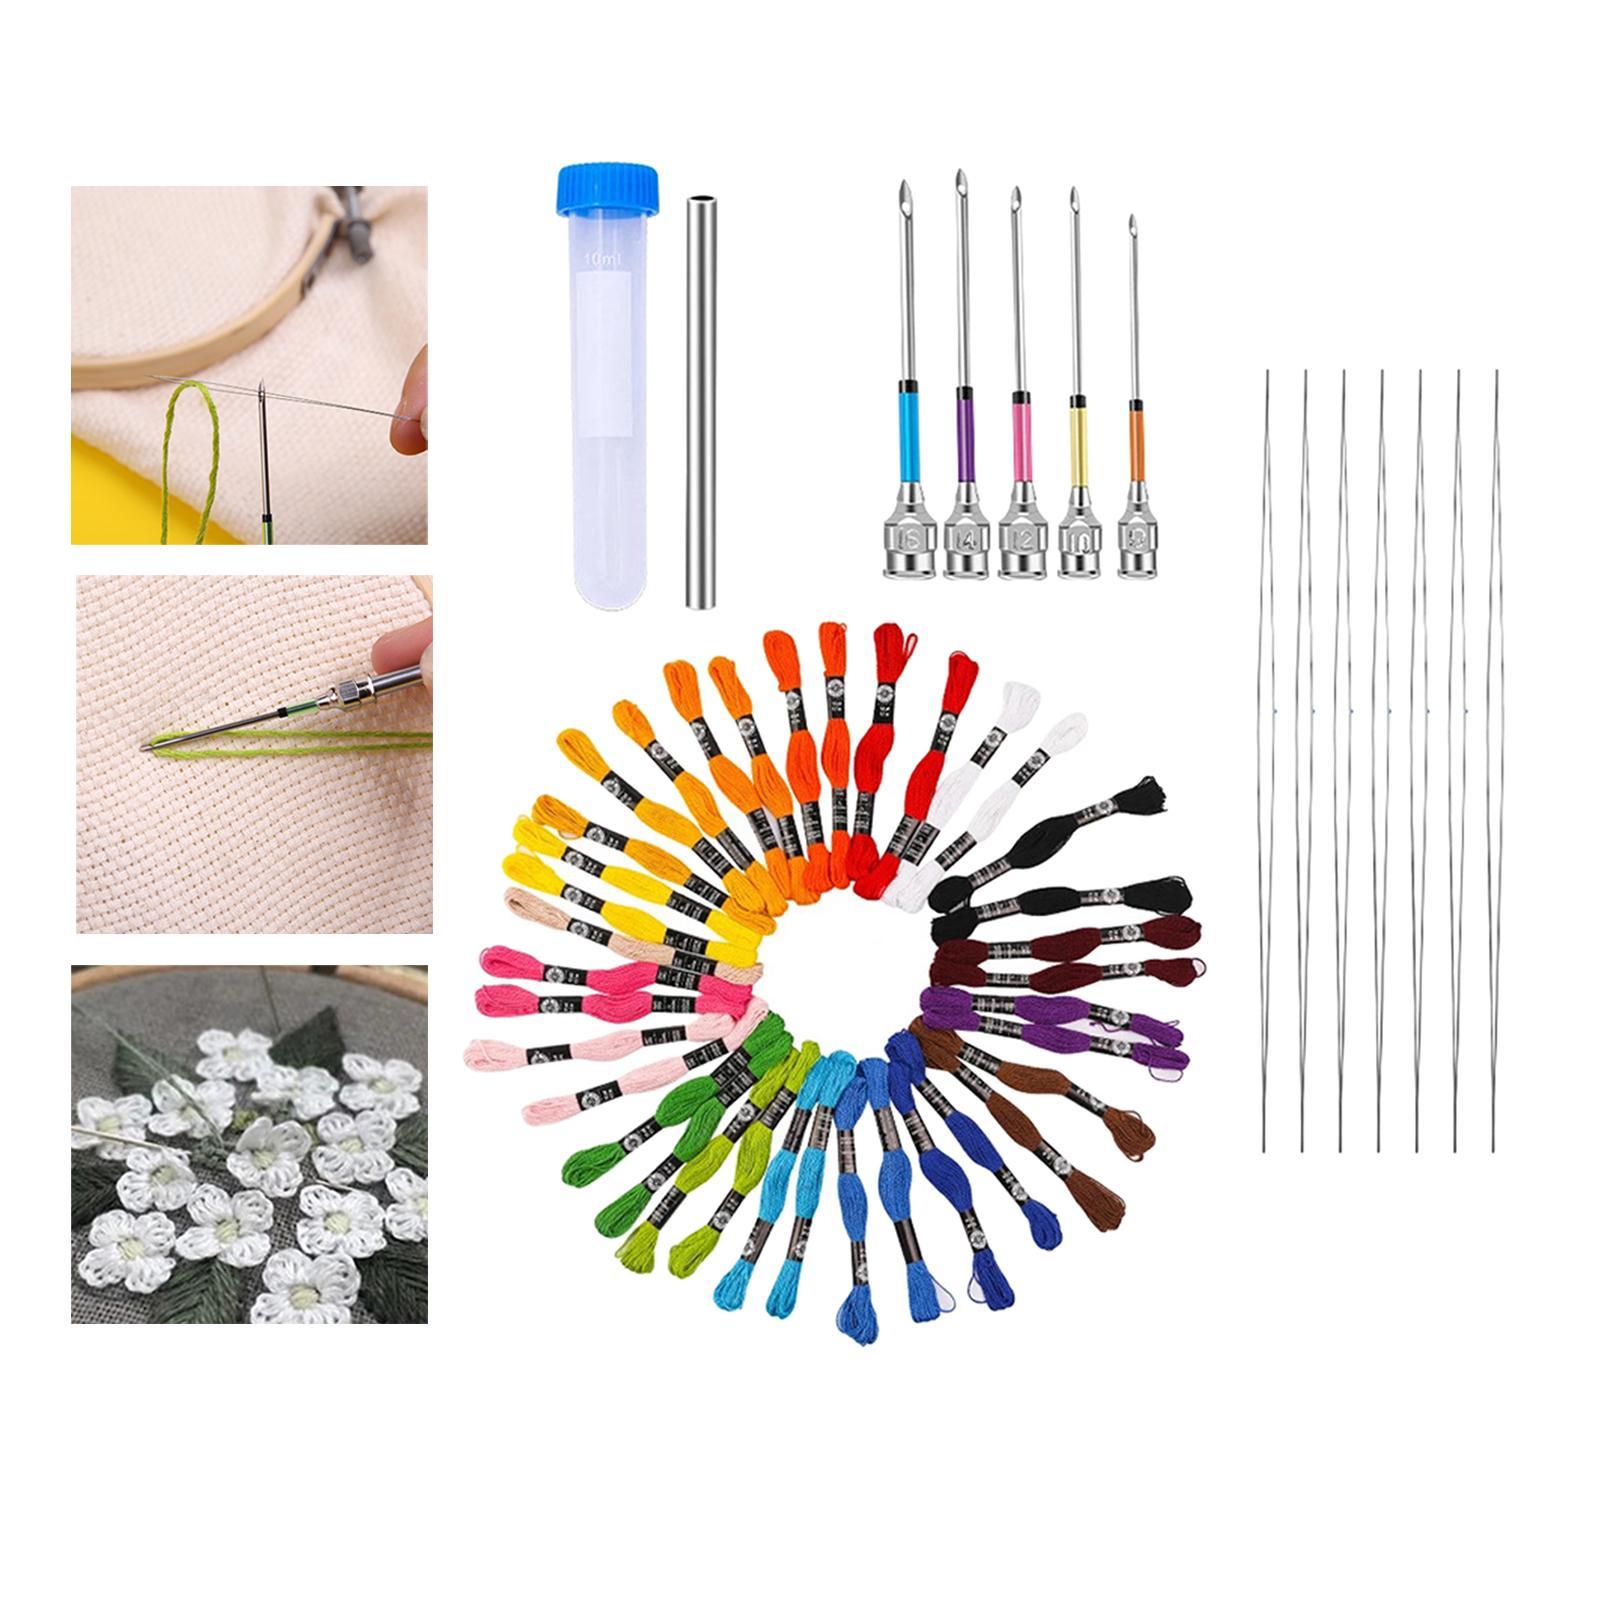 Embroidery Punch Needle, 62 Pcs Punch Needle Tool with Needle Punch, 48 Pcs Embroidery Thread, Embroidery Needles, Punch Needle Kit for Beginners